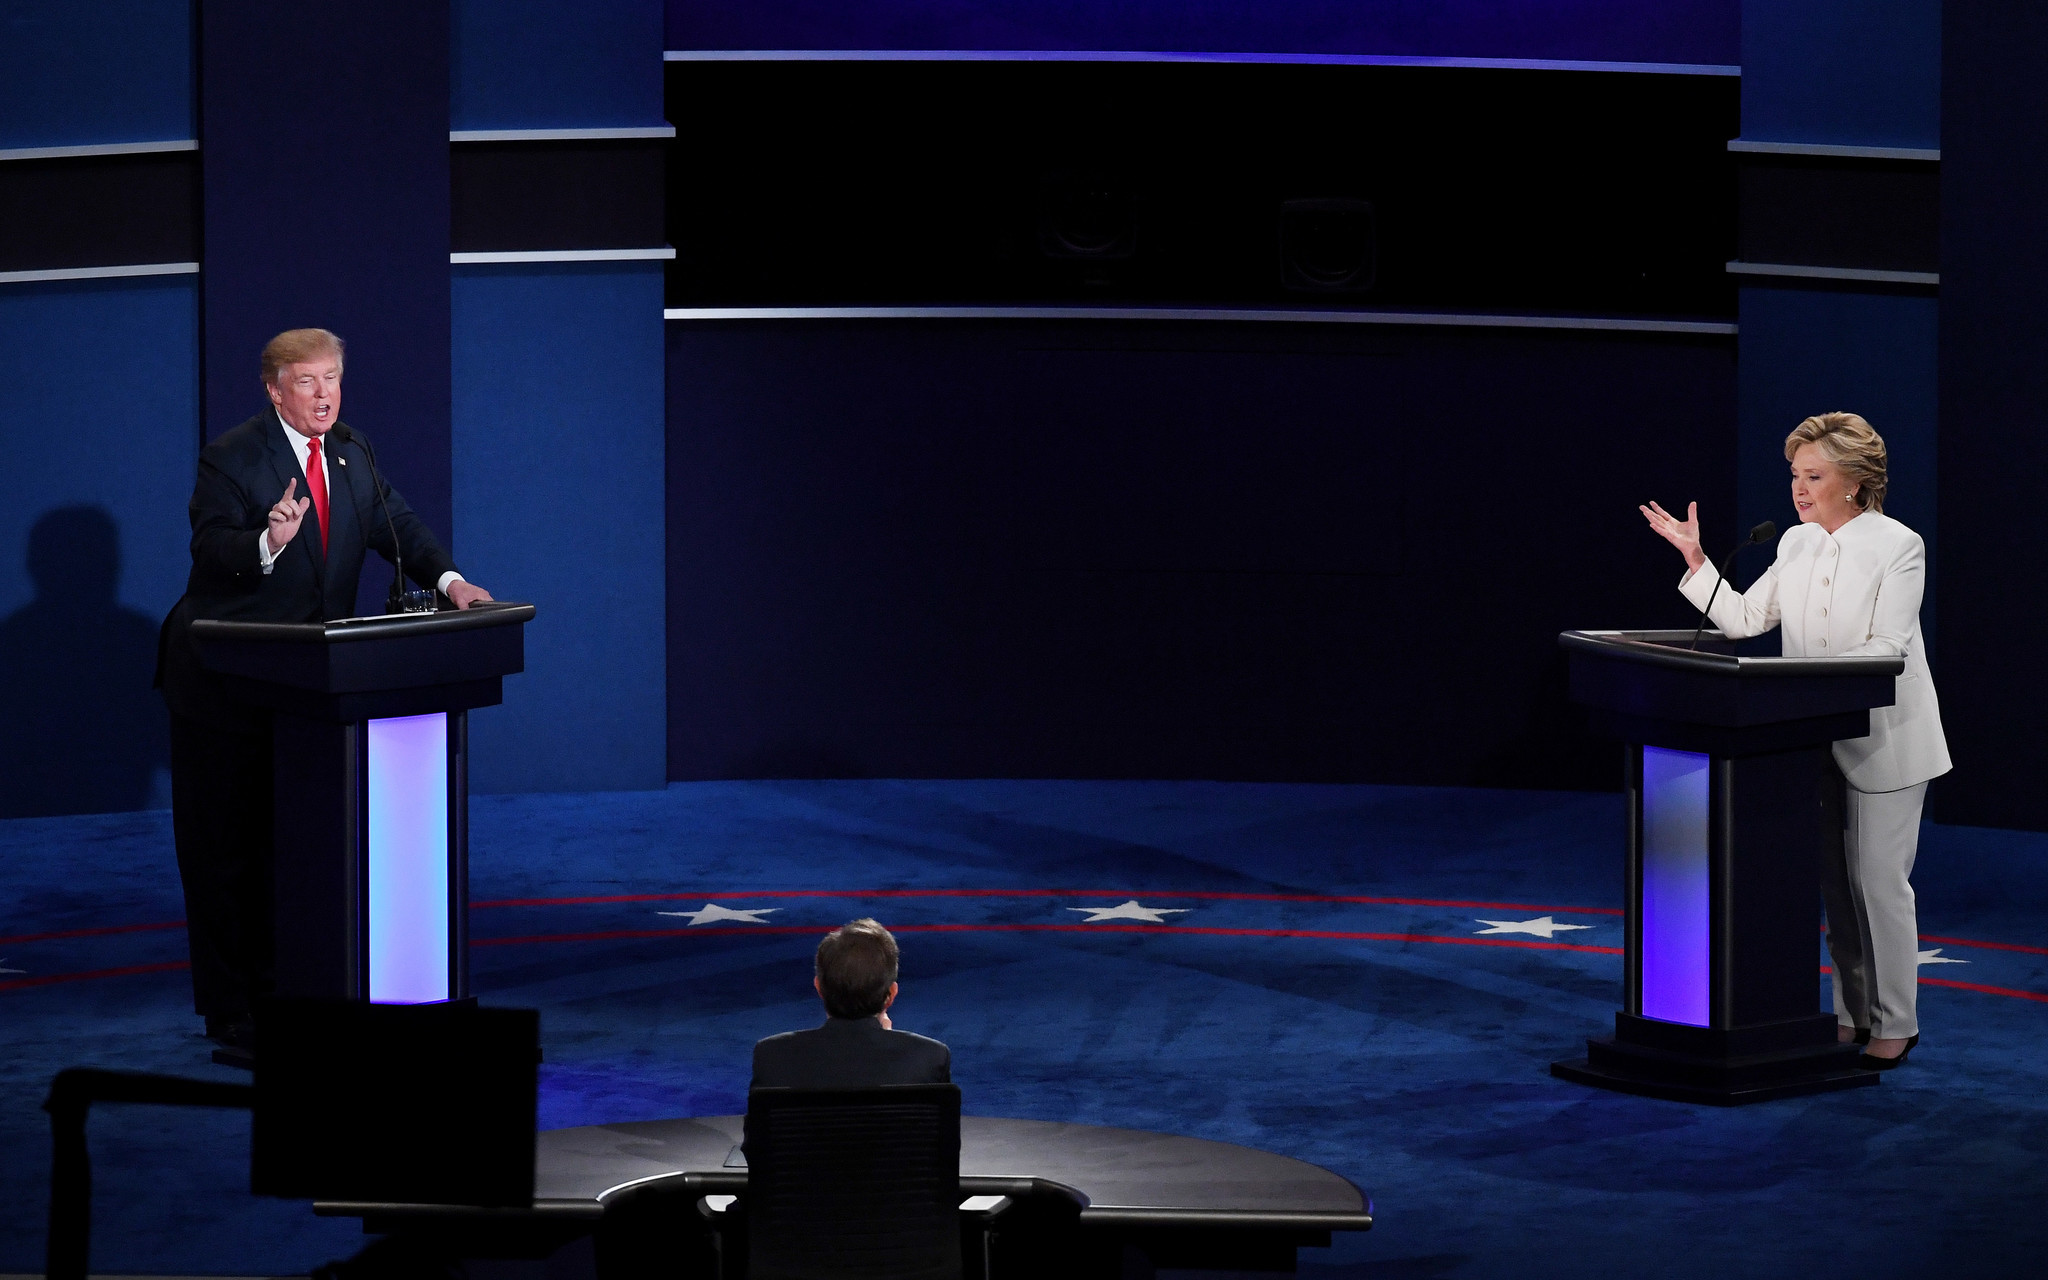 Goodnight, democracy: The best late-night jokes about the final presidential debate ...2048 x 1280